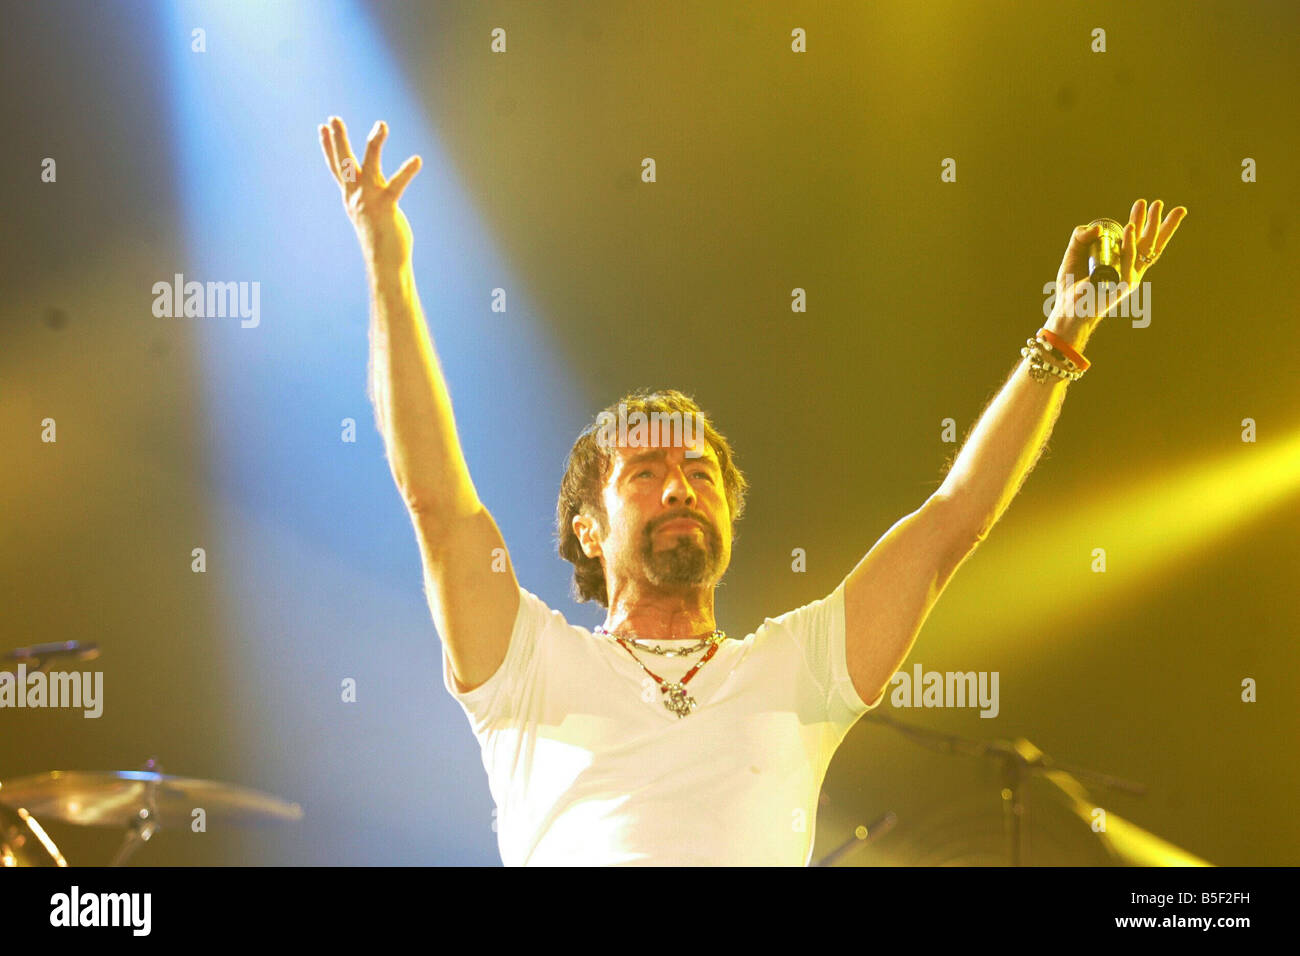 Queen and Paul Rodgers in concert at the Newcastle Metro Radio Arena Paul Rodgers Stock Photo